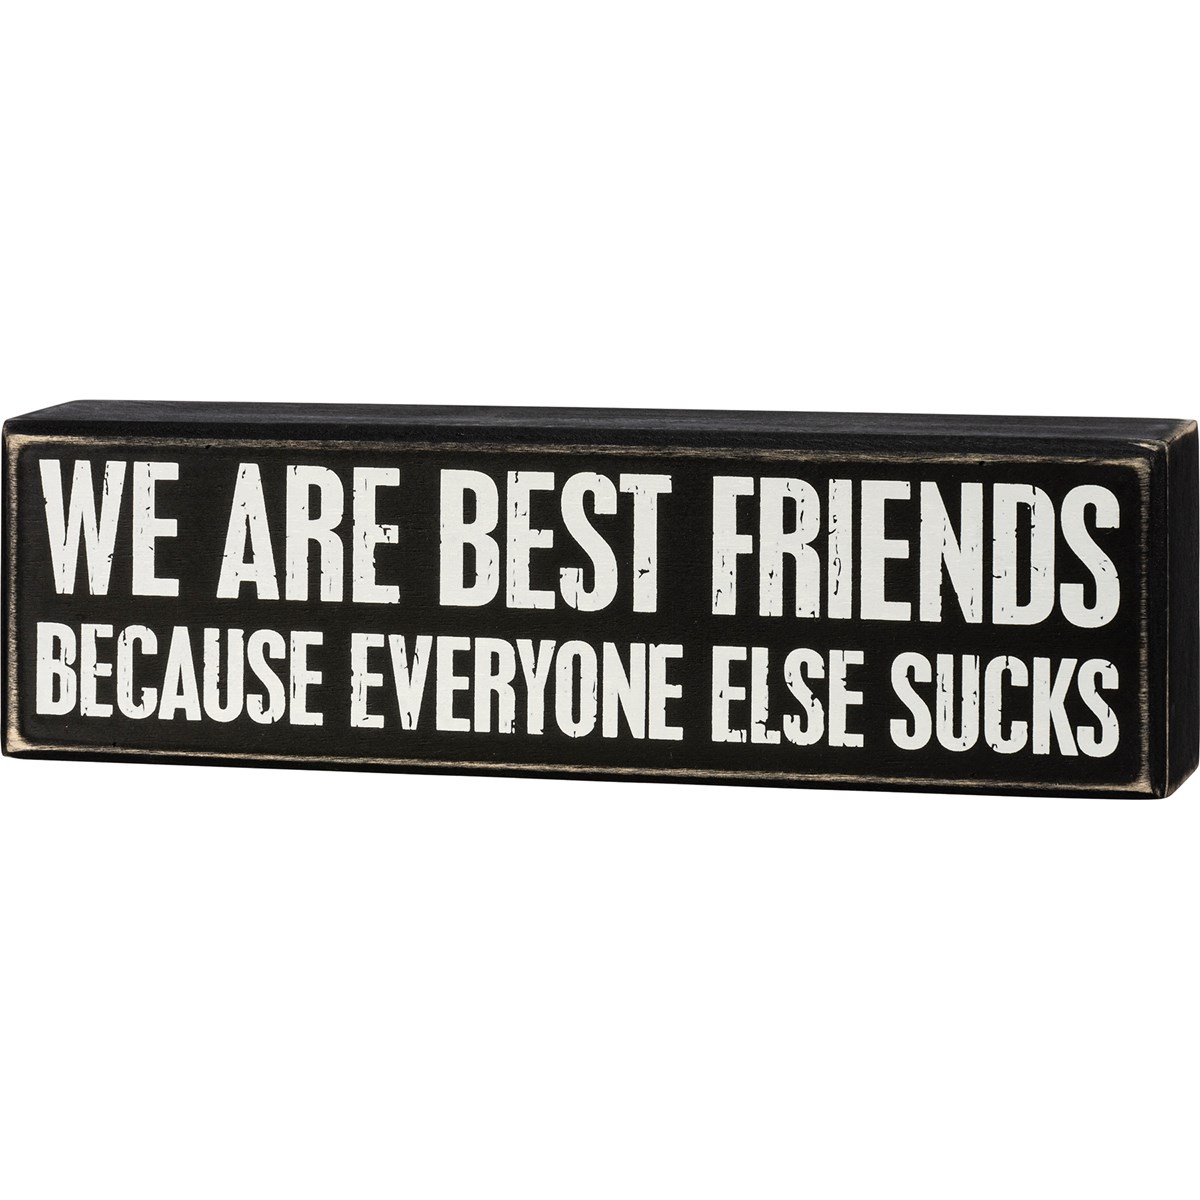 We Are Best Friends Box Sign - Wood